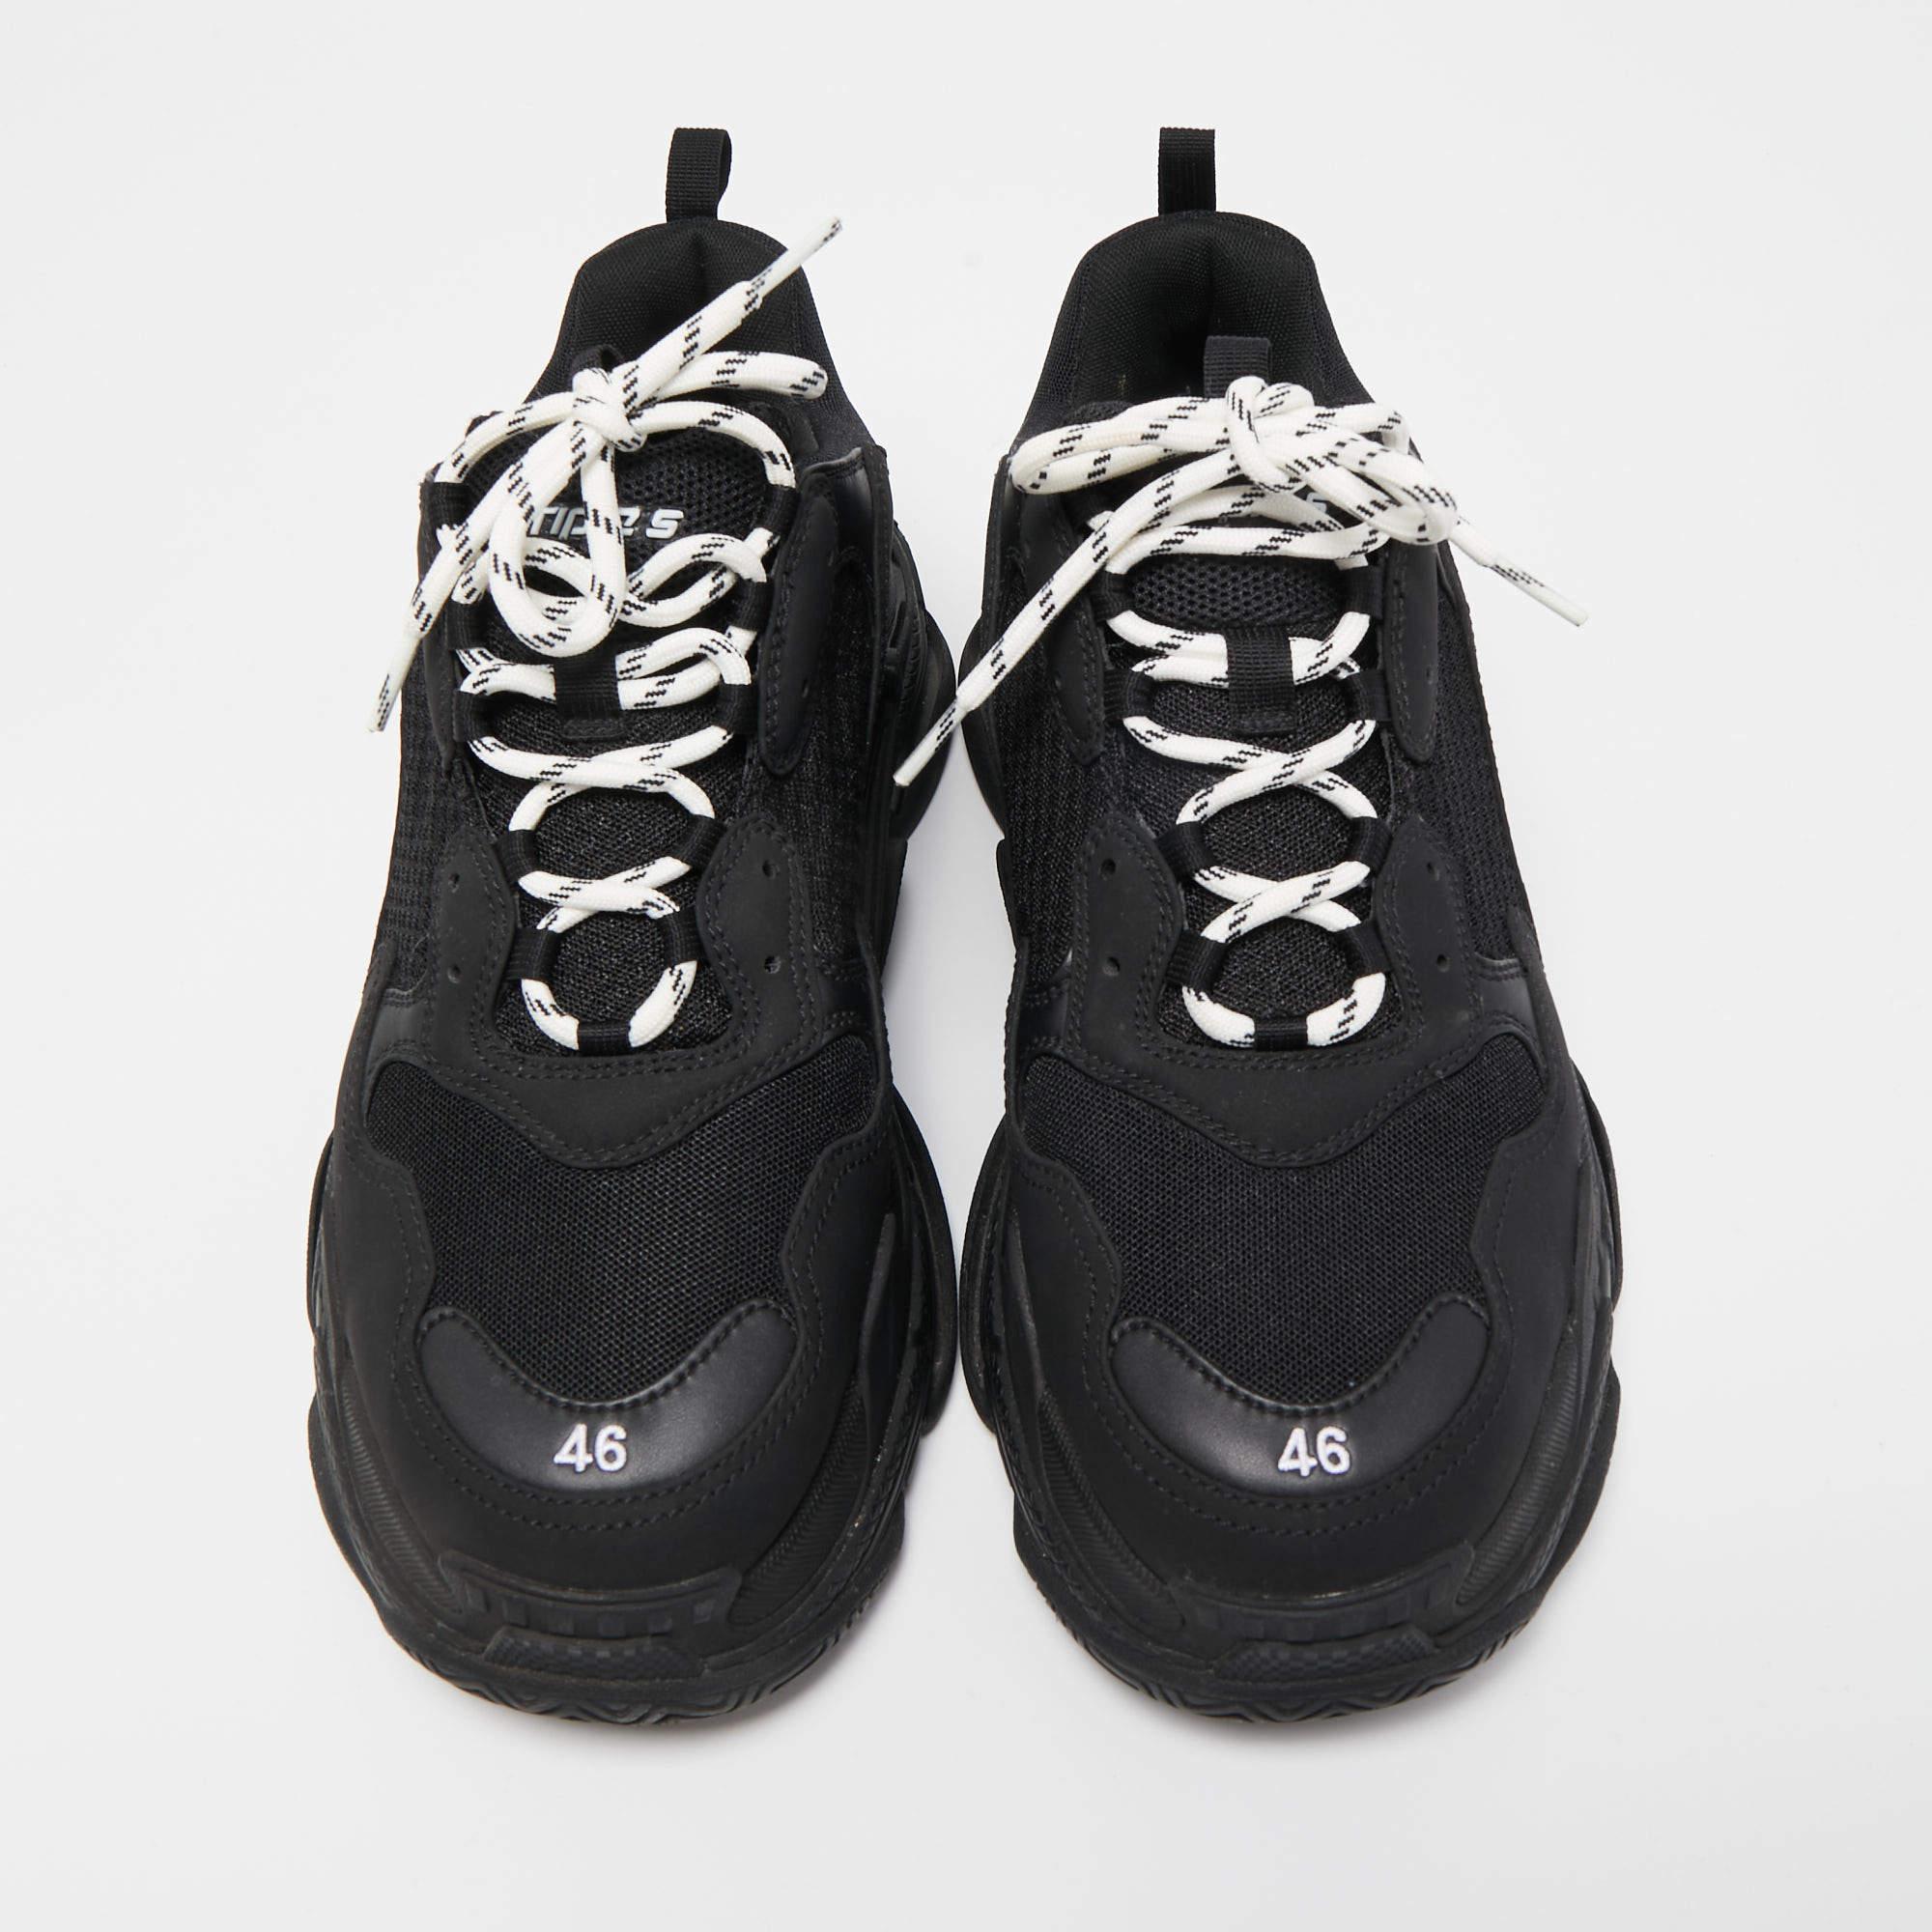 Balenciaga Black Mesh and Leather Triple S Sneakers Size 46 2